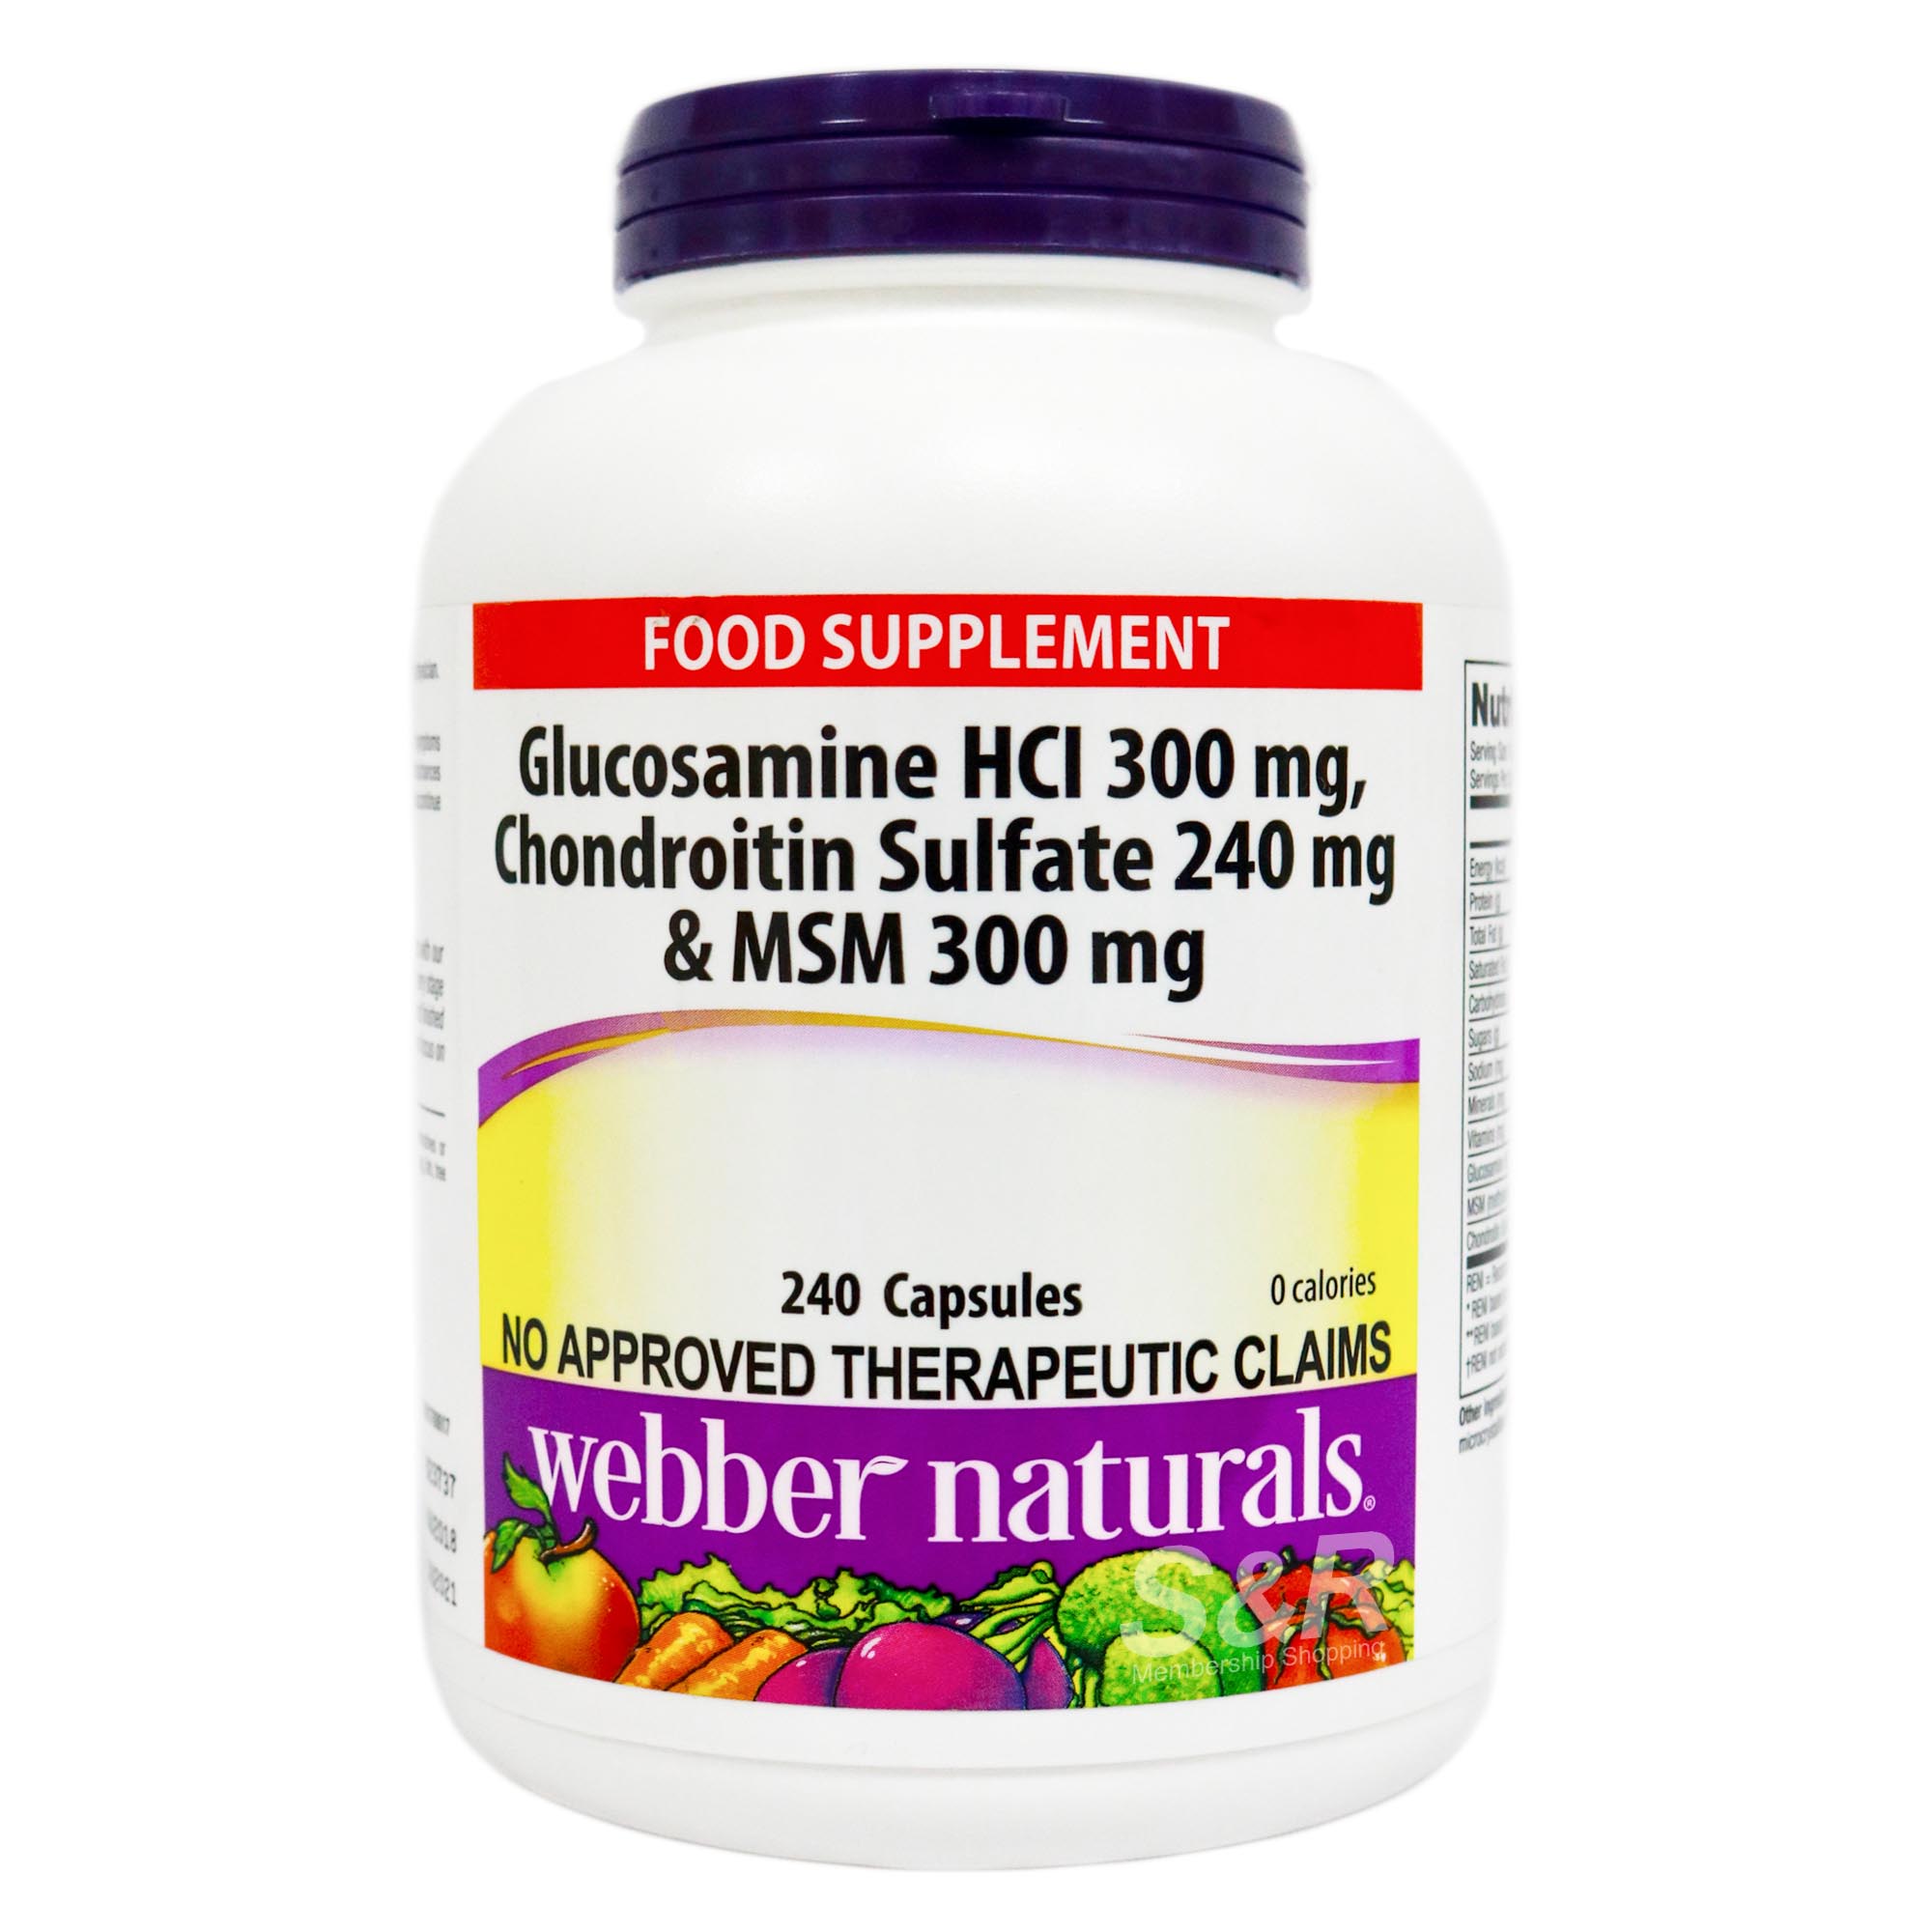 Webber Naturals Triple Action Glucosamin HCI 300mg, Chondroitin Sulfate MSM 300mg 240 capsules